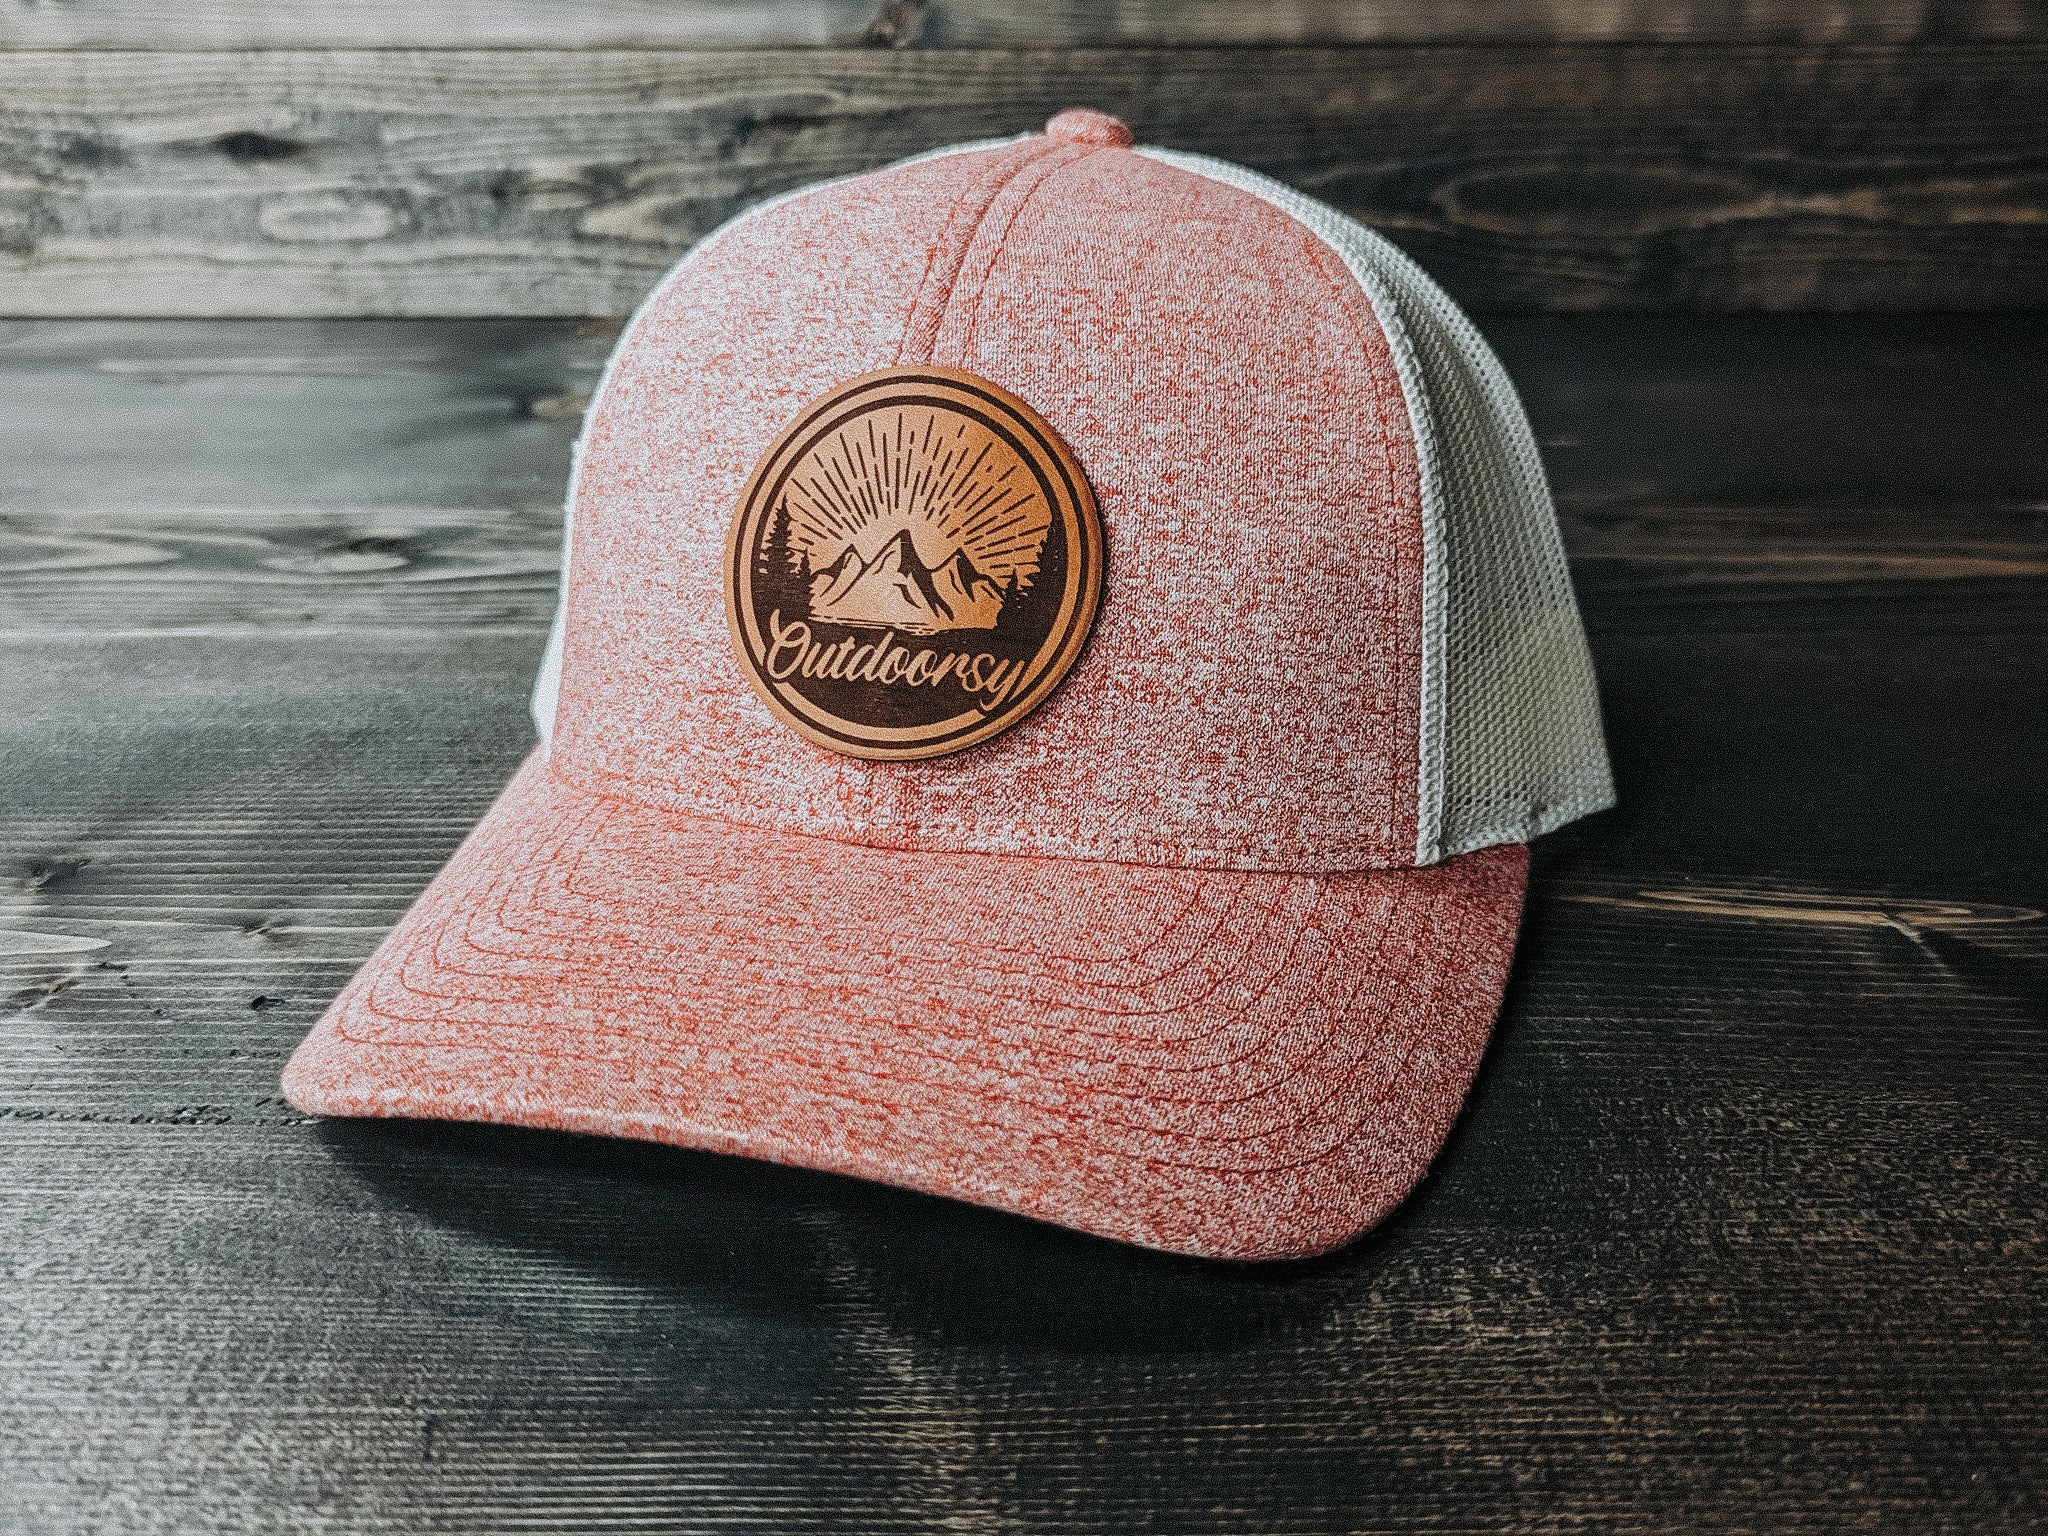 Pine Fly Leather Patch Hats - Wyo Dirt Customs Heather Red/Birch